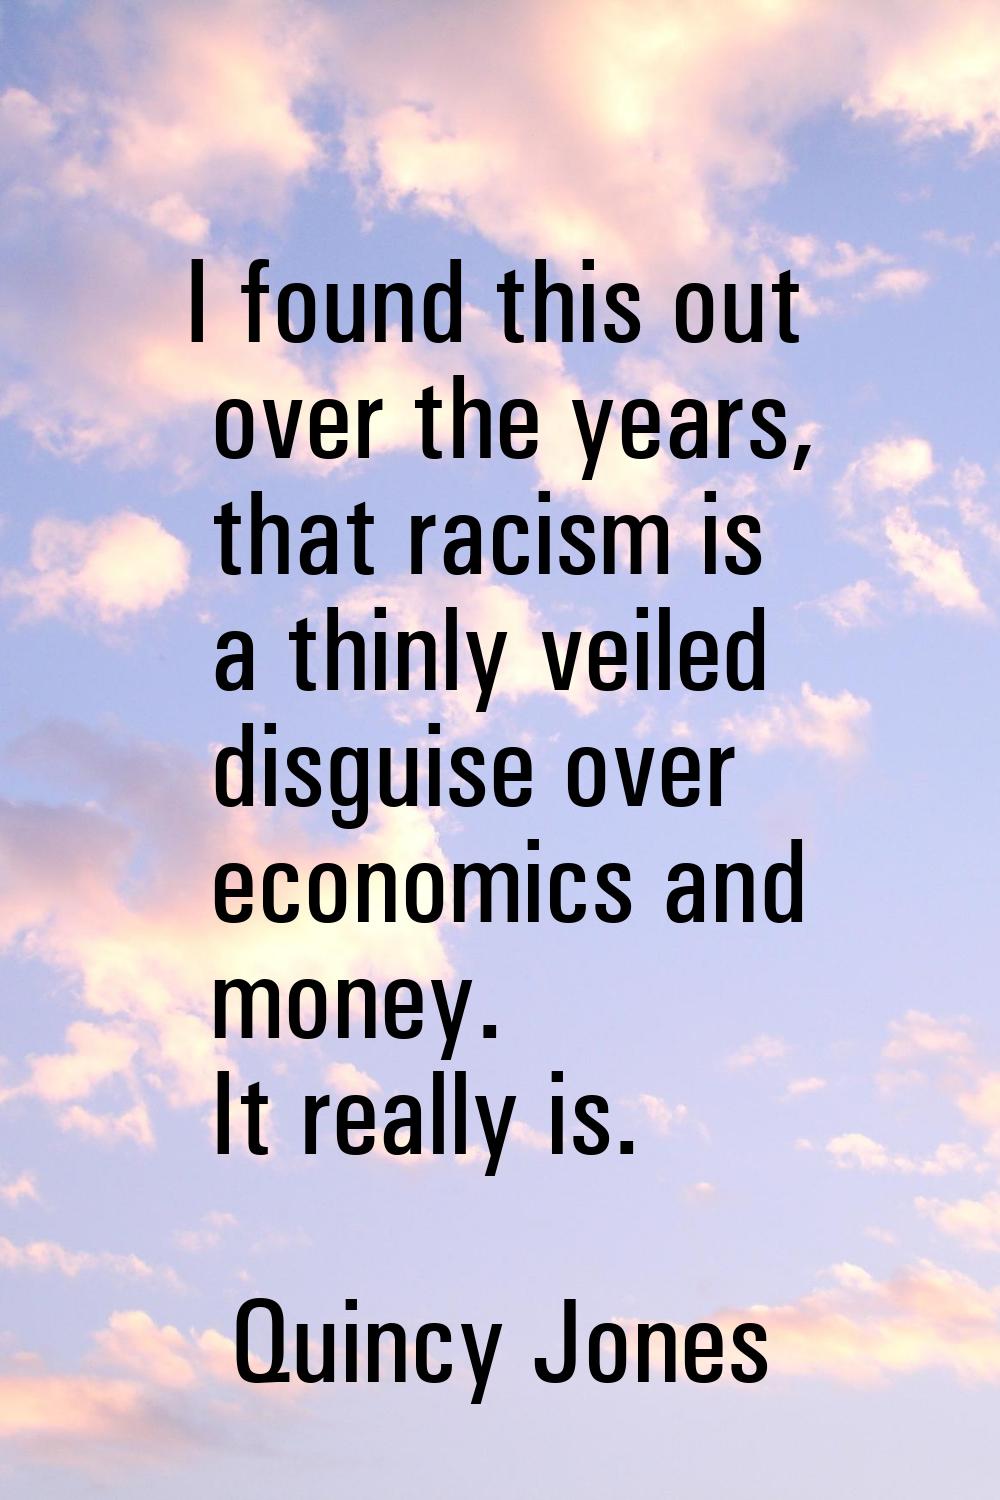 I found this out over the years, that racism is a thinly veiled disguise over economics and money. 